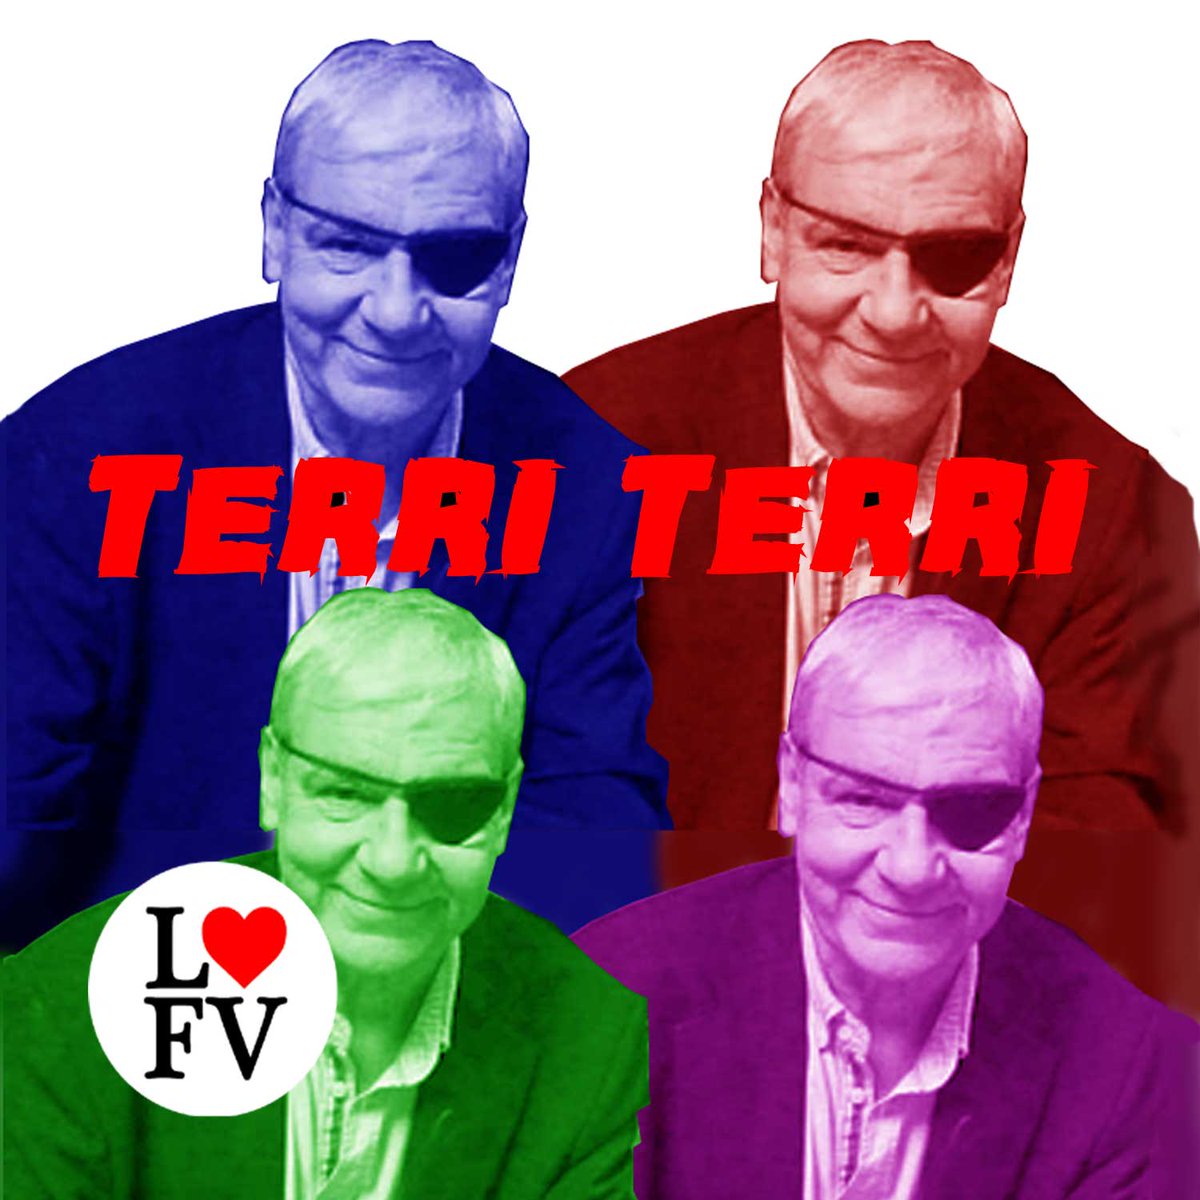 Terri Terri celebrates the 75th birthday of #Belfast legend and godfather of punk, #TerriHooley, the owner of #GoodVibrations record shop, who discovered, recorded and promoted #TheUndertones' classic debut EP, 'Teenage Kicks'. …eloveandthefriendlyvibes.bandcamp.com #llfv #TerriTerri #punkrock